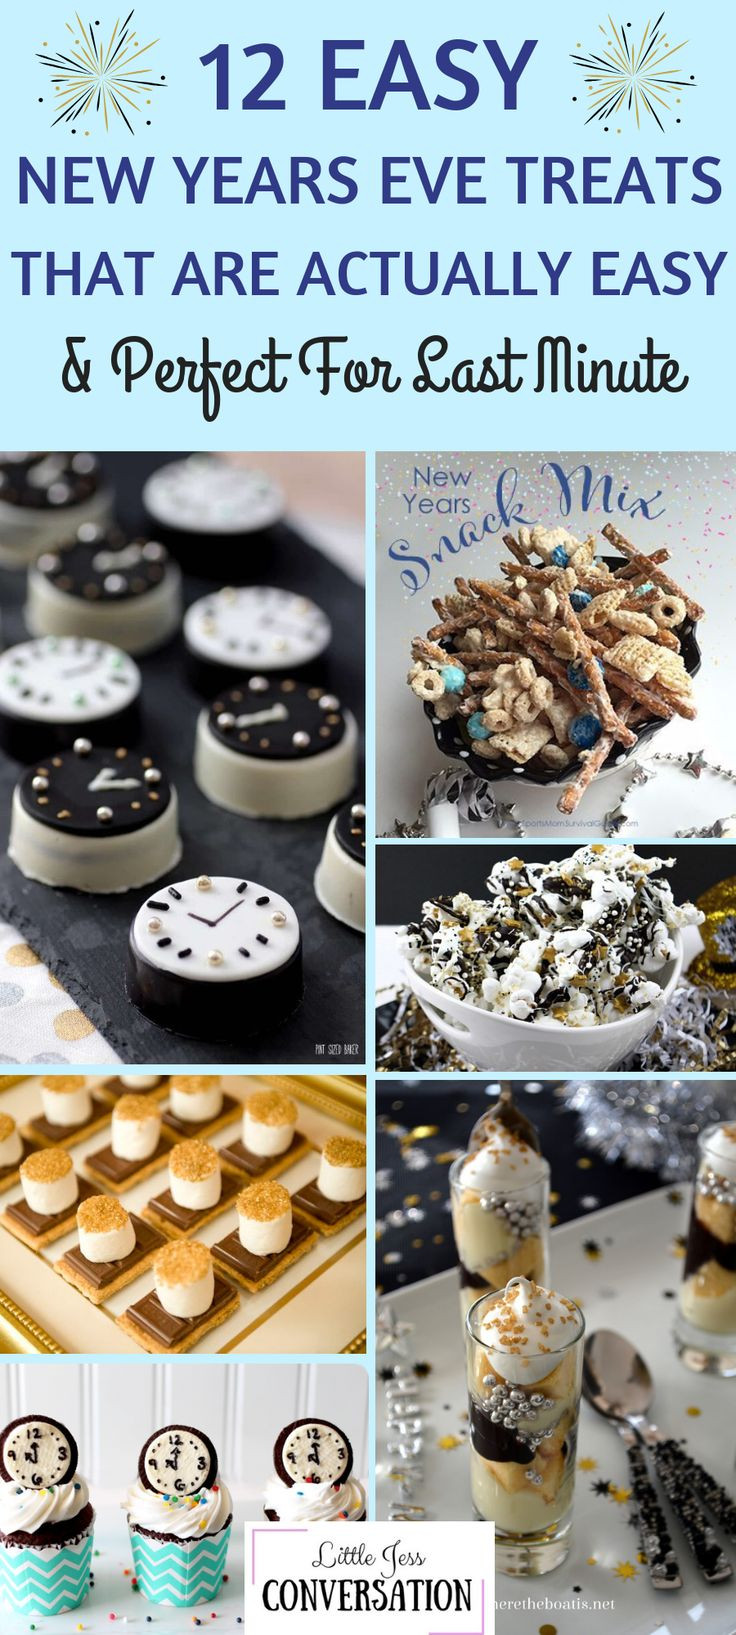 Easy New Year'S Eve Desserts
 12 Easy Last Minute New Years Eve Treats That Are Actually